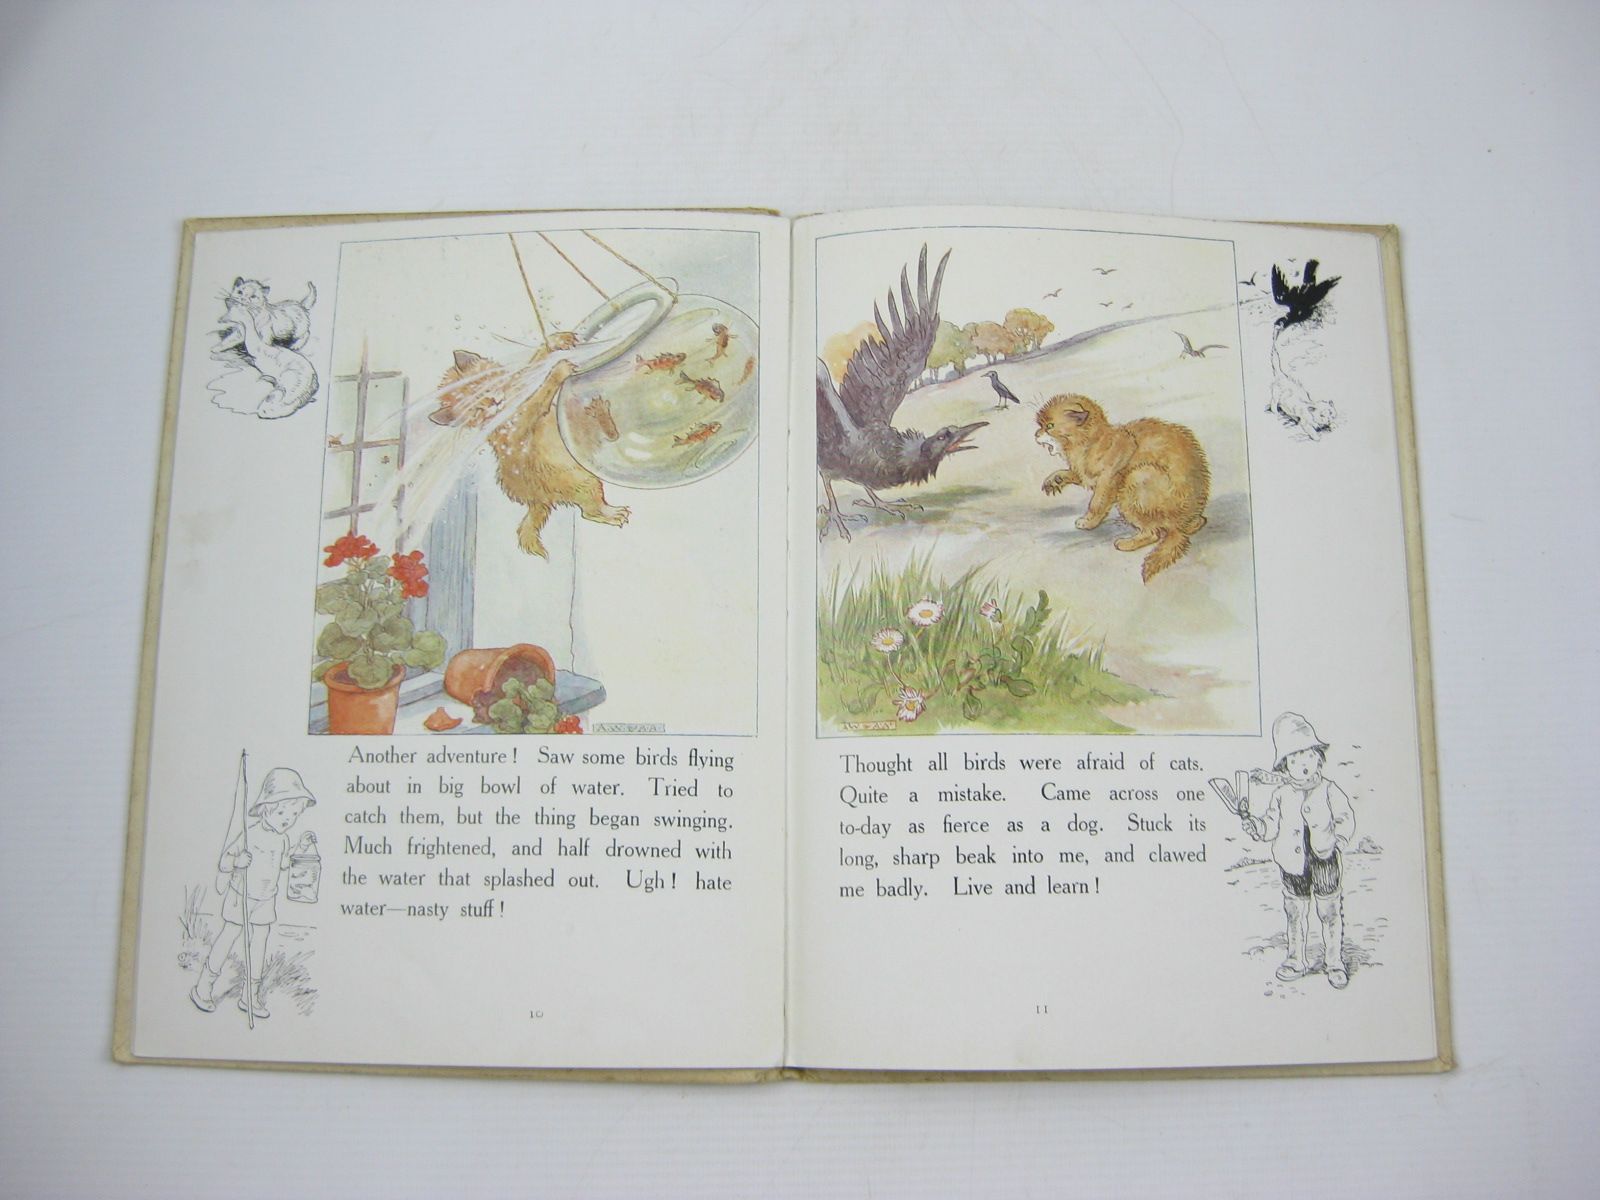 Photo of THE CUDDLY -KITTY BOOK written by Anderson, Anne
Wright, Alan illustrated by Anderson, Anne
Wright, Alan published by Thomas Nelson and Sons Ltd. (STOCK CODE: 1402348)  for sale by Stella & Rose's Books